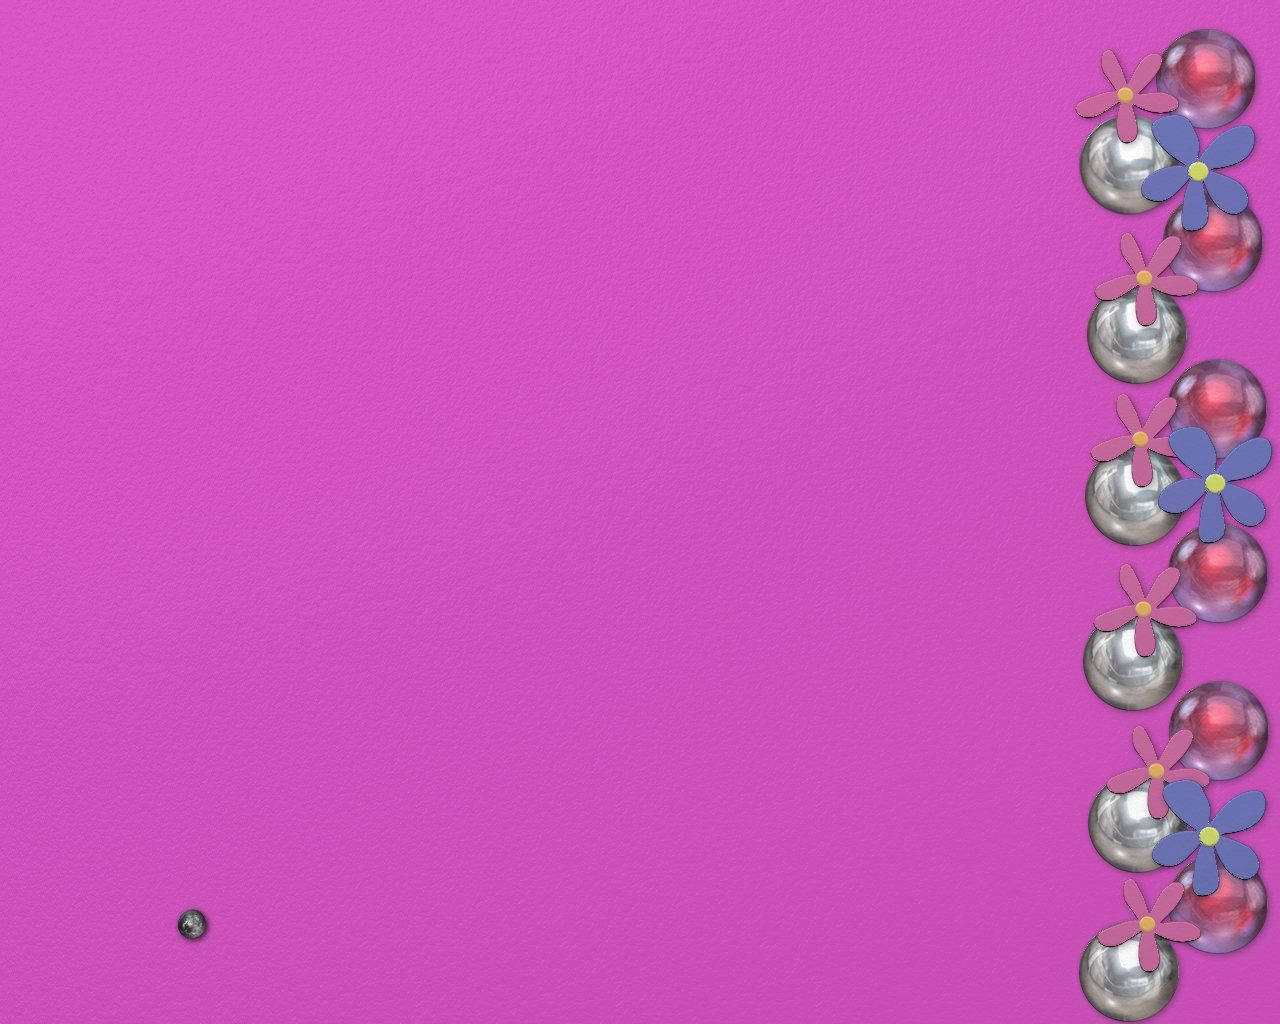 Y2k Aesthetic Pearls And Flowers Background